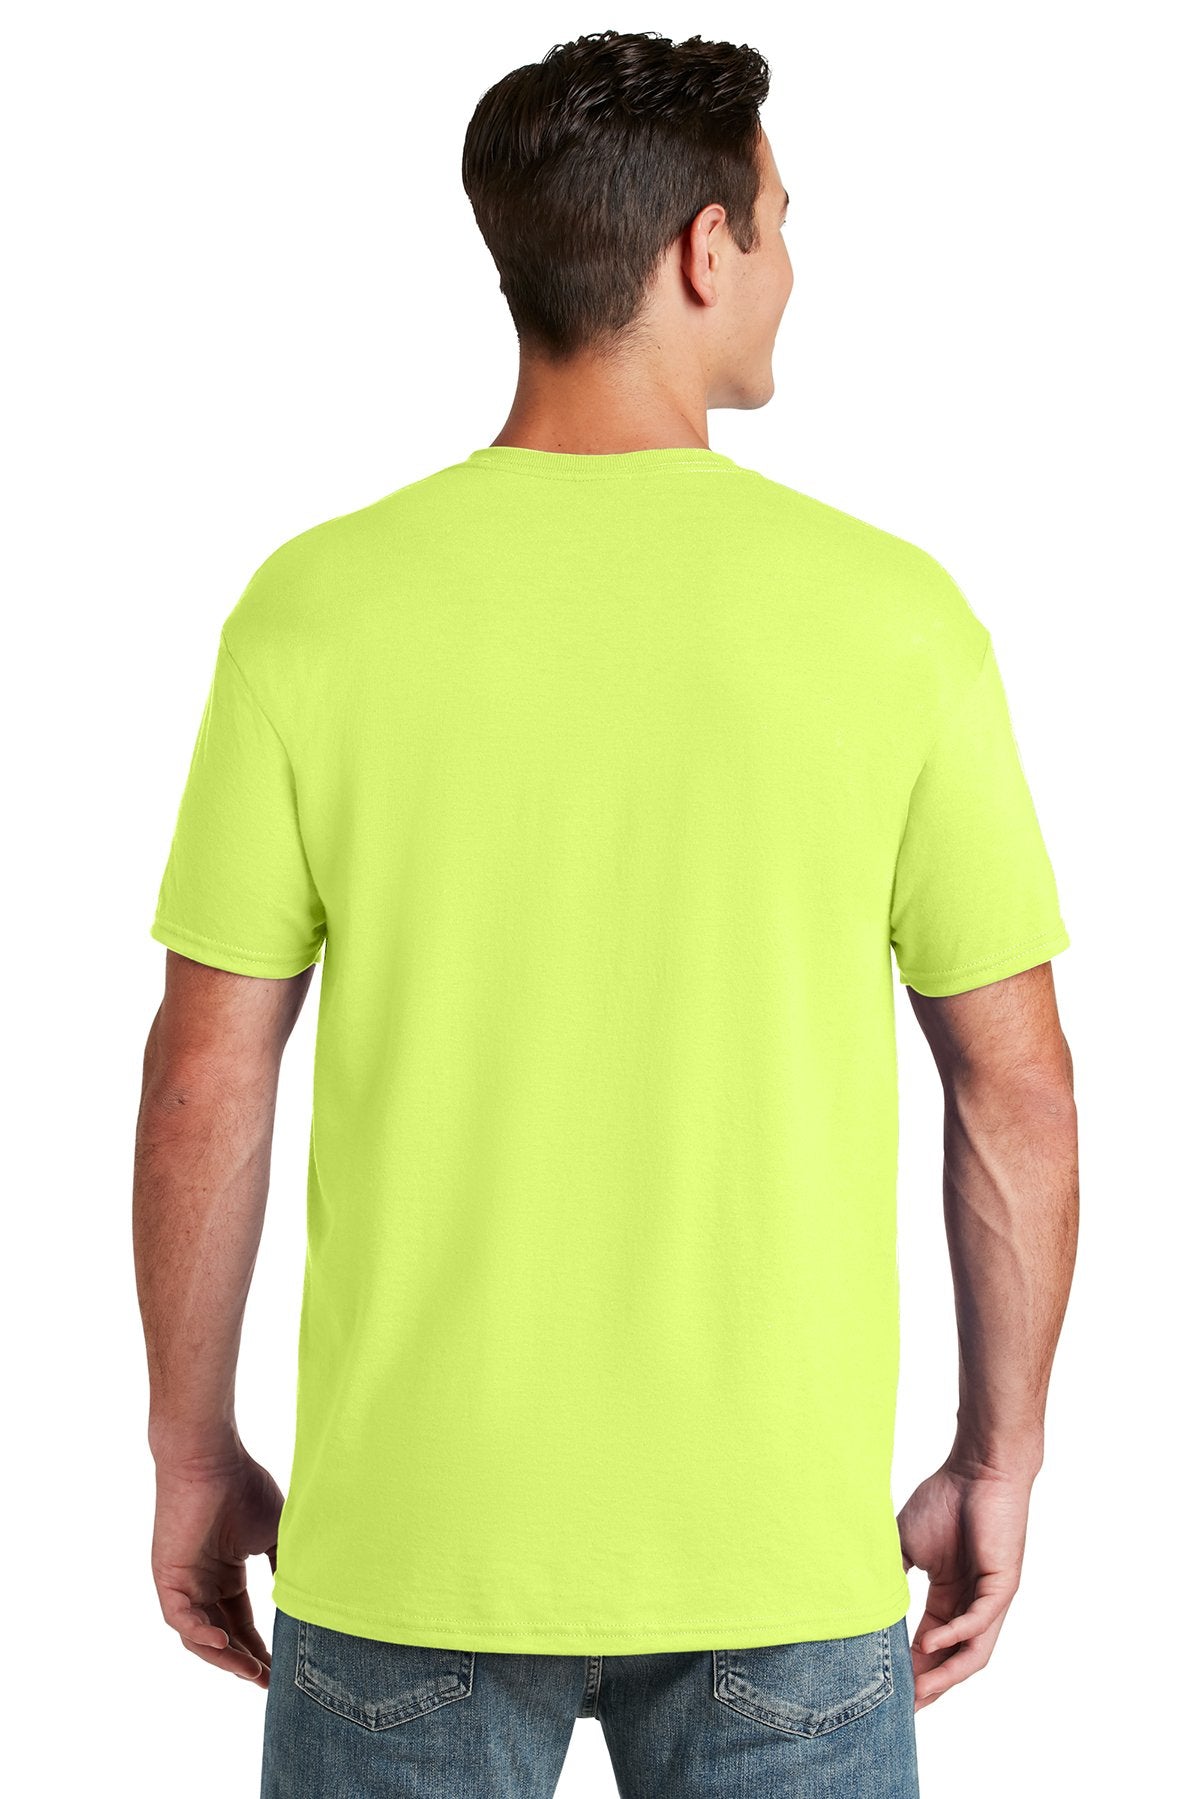 Jerzees Dri-Power Active 50/50 Cotton/Poly T-Shirt 29M Safety Green